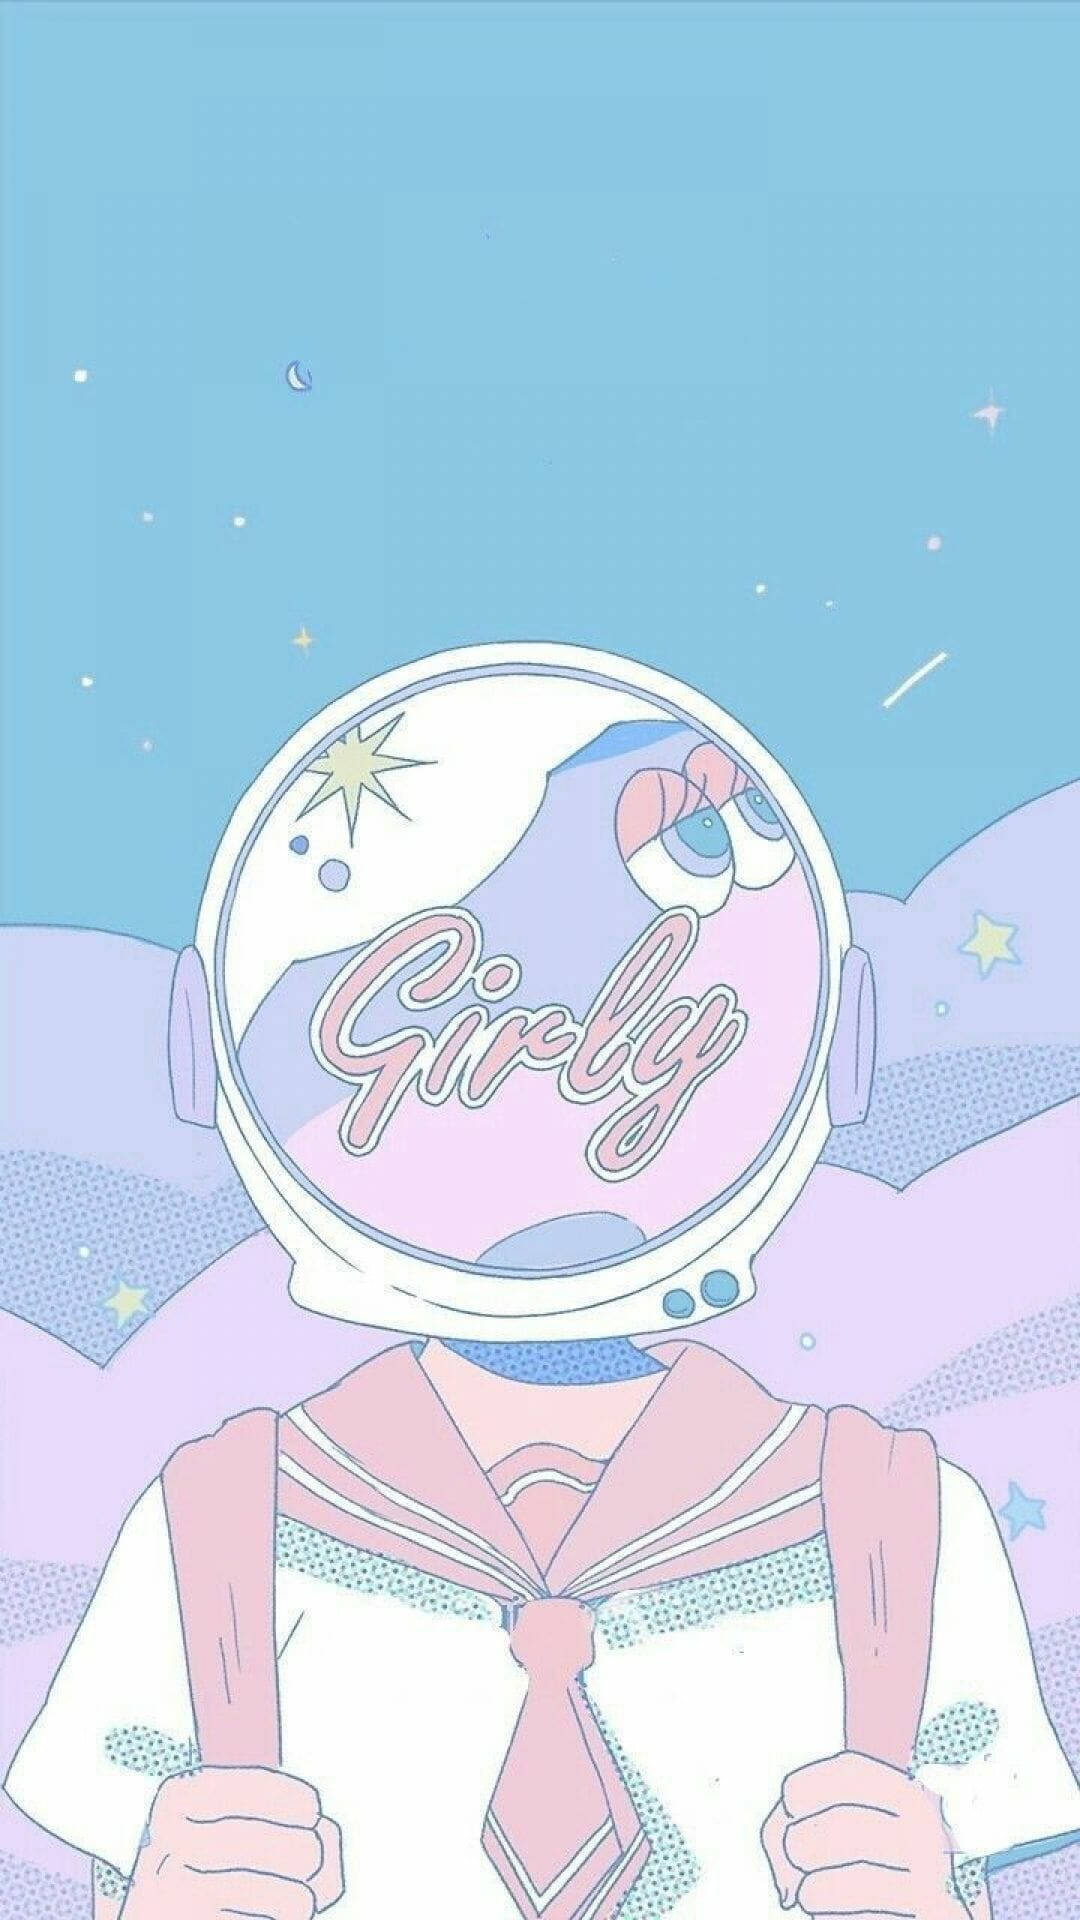 Space-Themed Pretty Aesthetic Wallpaper